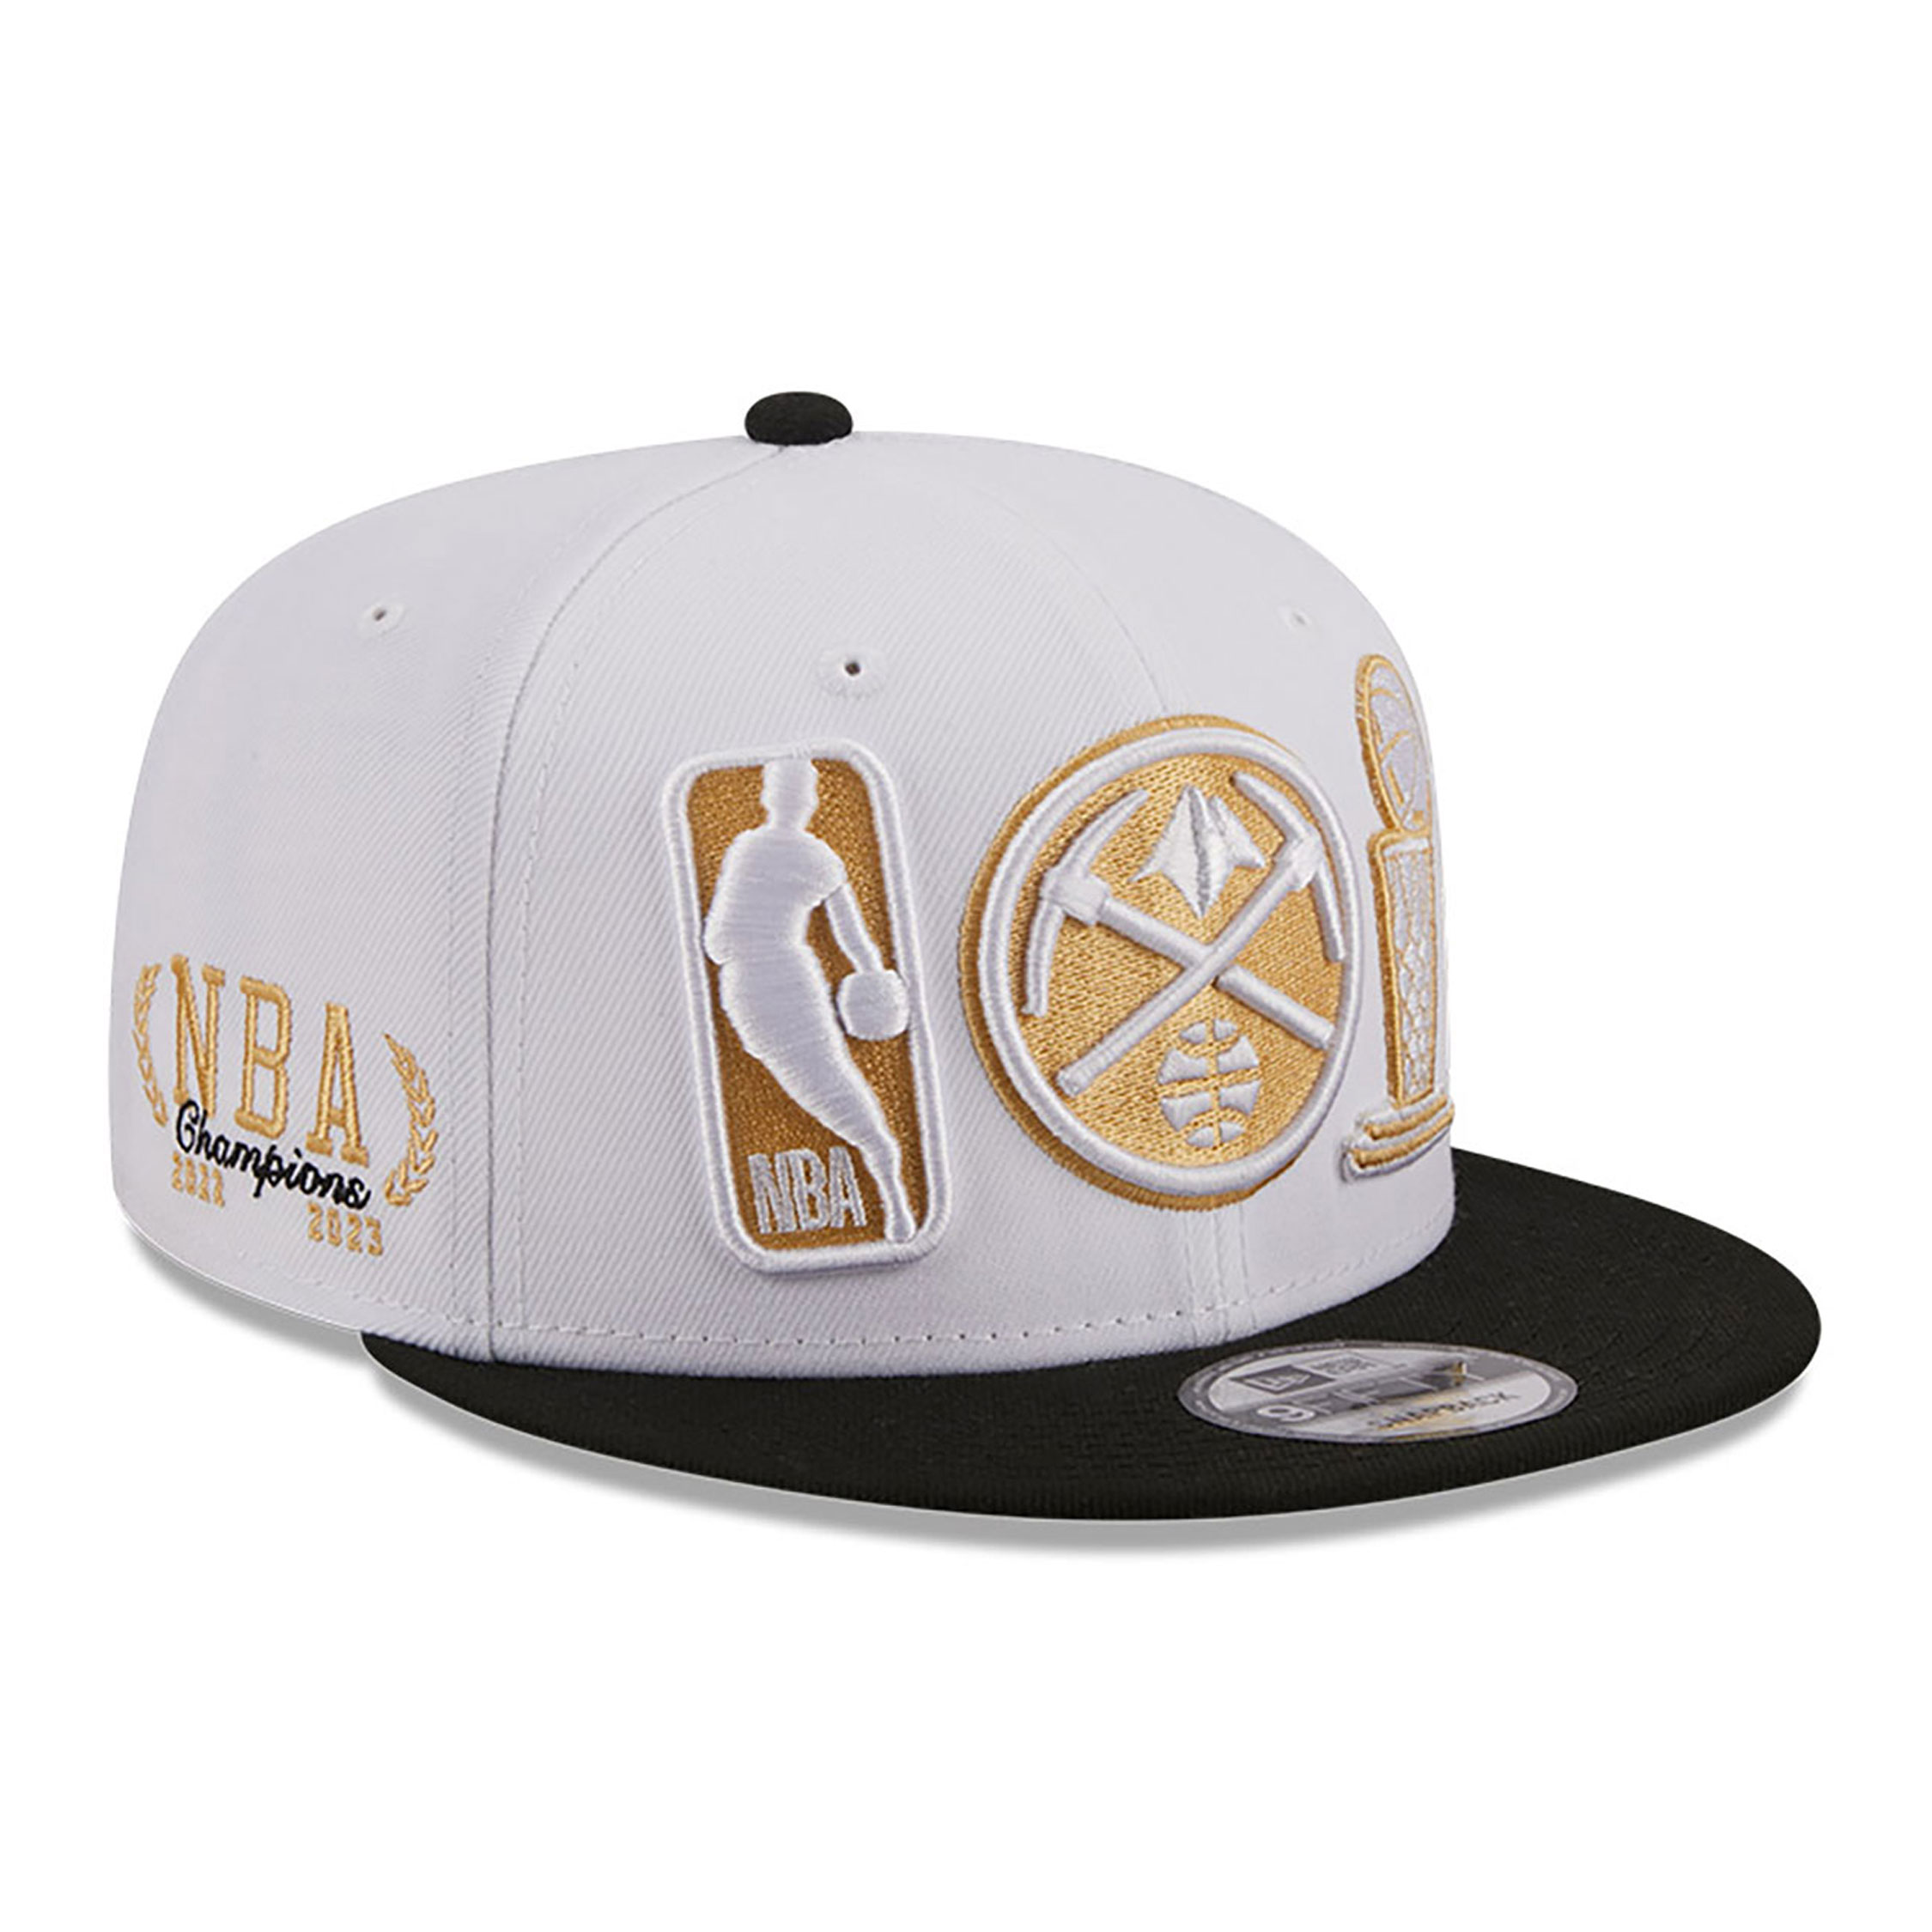 Denver Nuggets NBA Ring Ceremony White 9FIFTY Snapback Cap